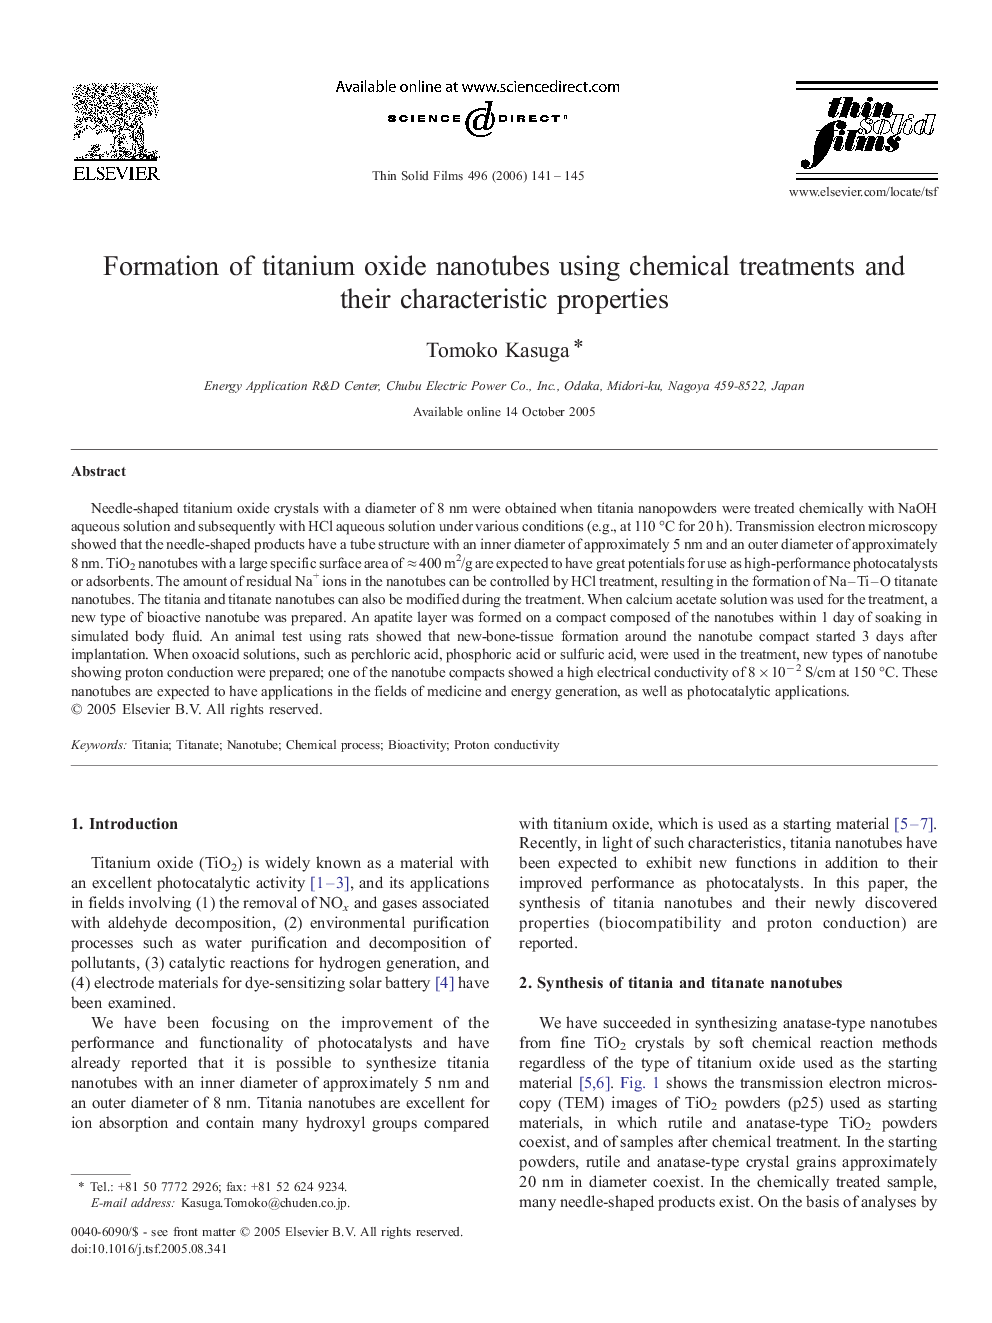 Formation of titanium oxide nanotubes using chemical treatments and their characteristic properties